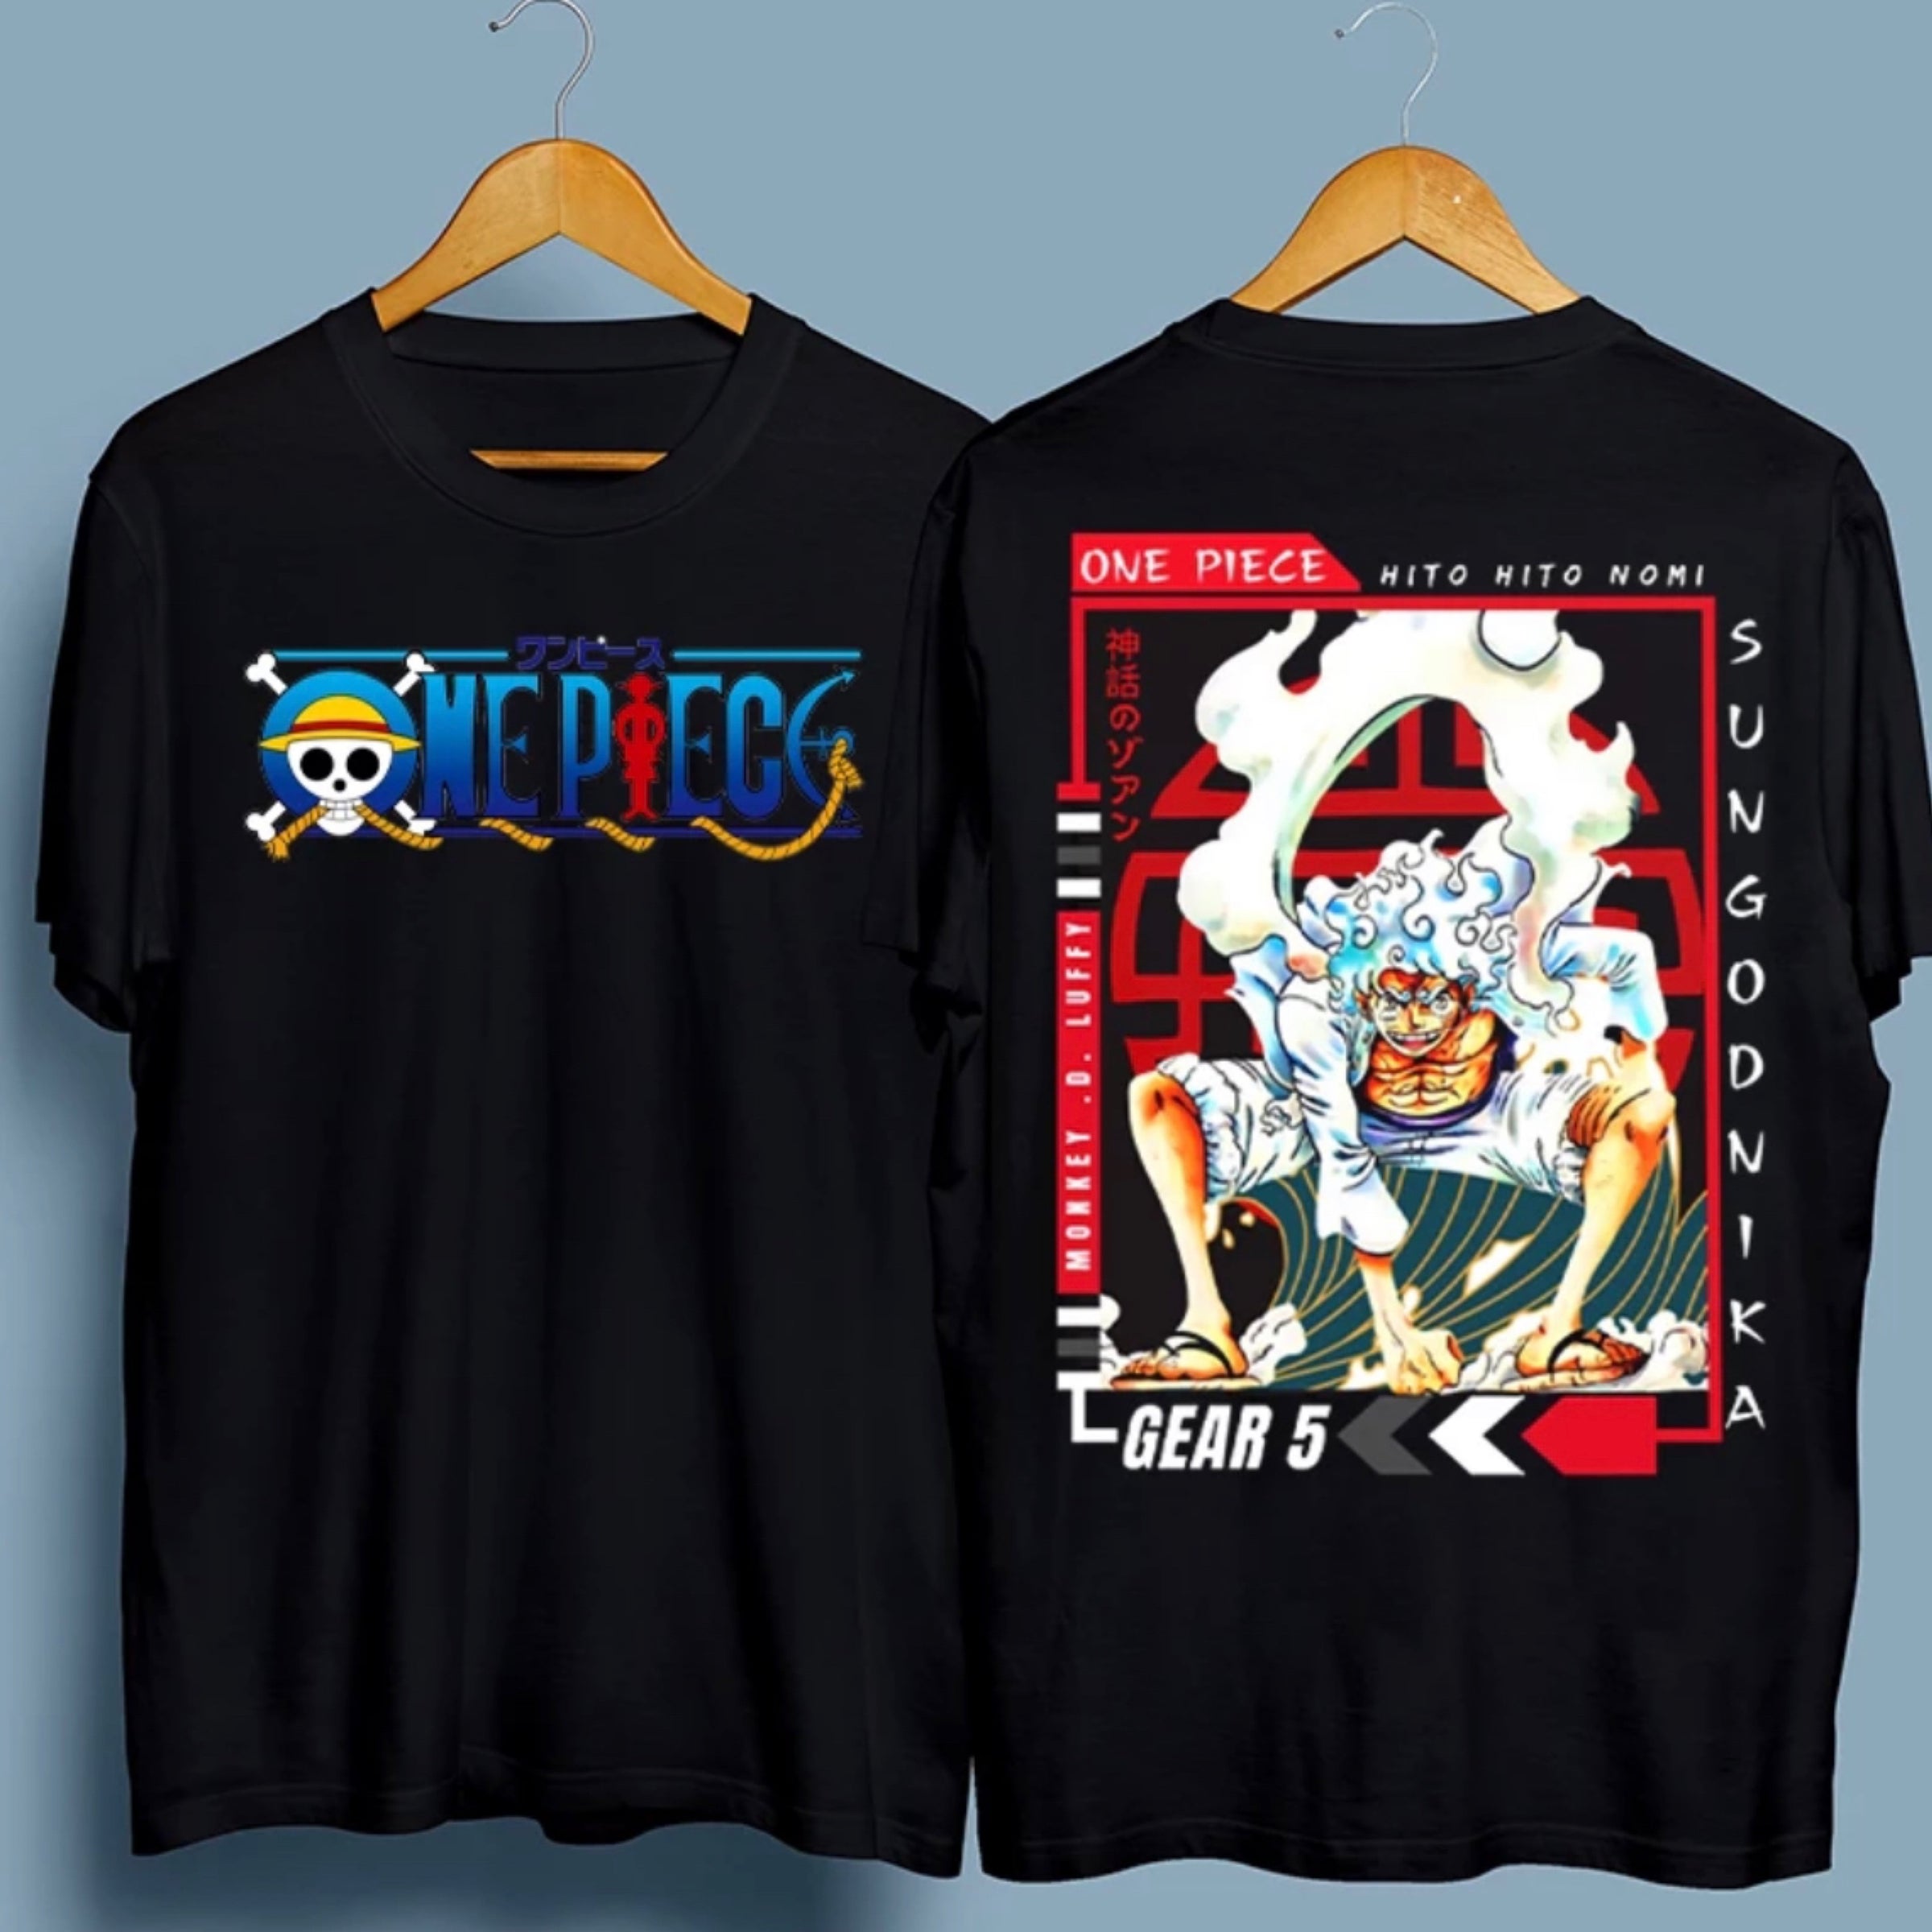 Luffy Gear 5 Short Sleeve Baby One-Piece for Sale